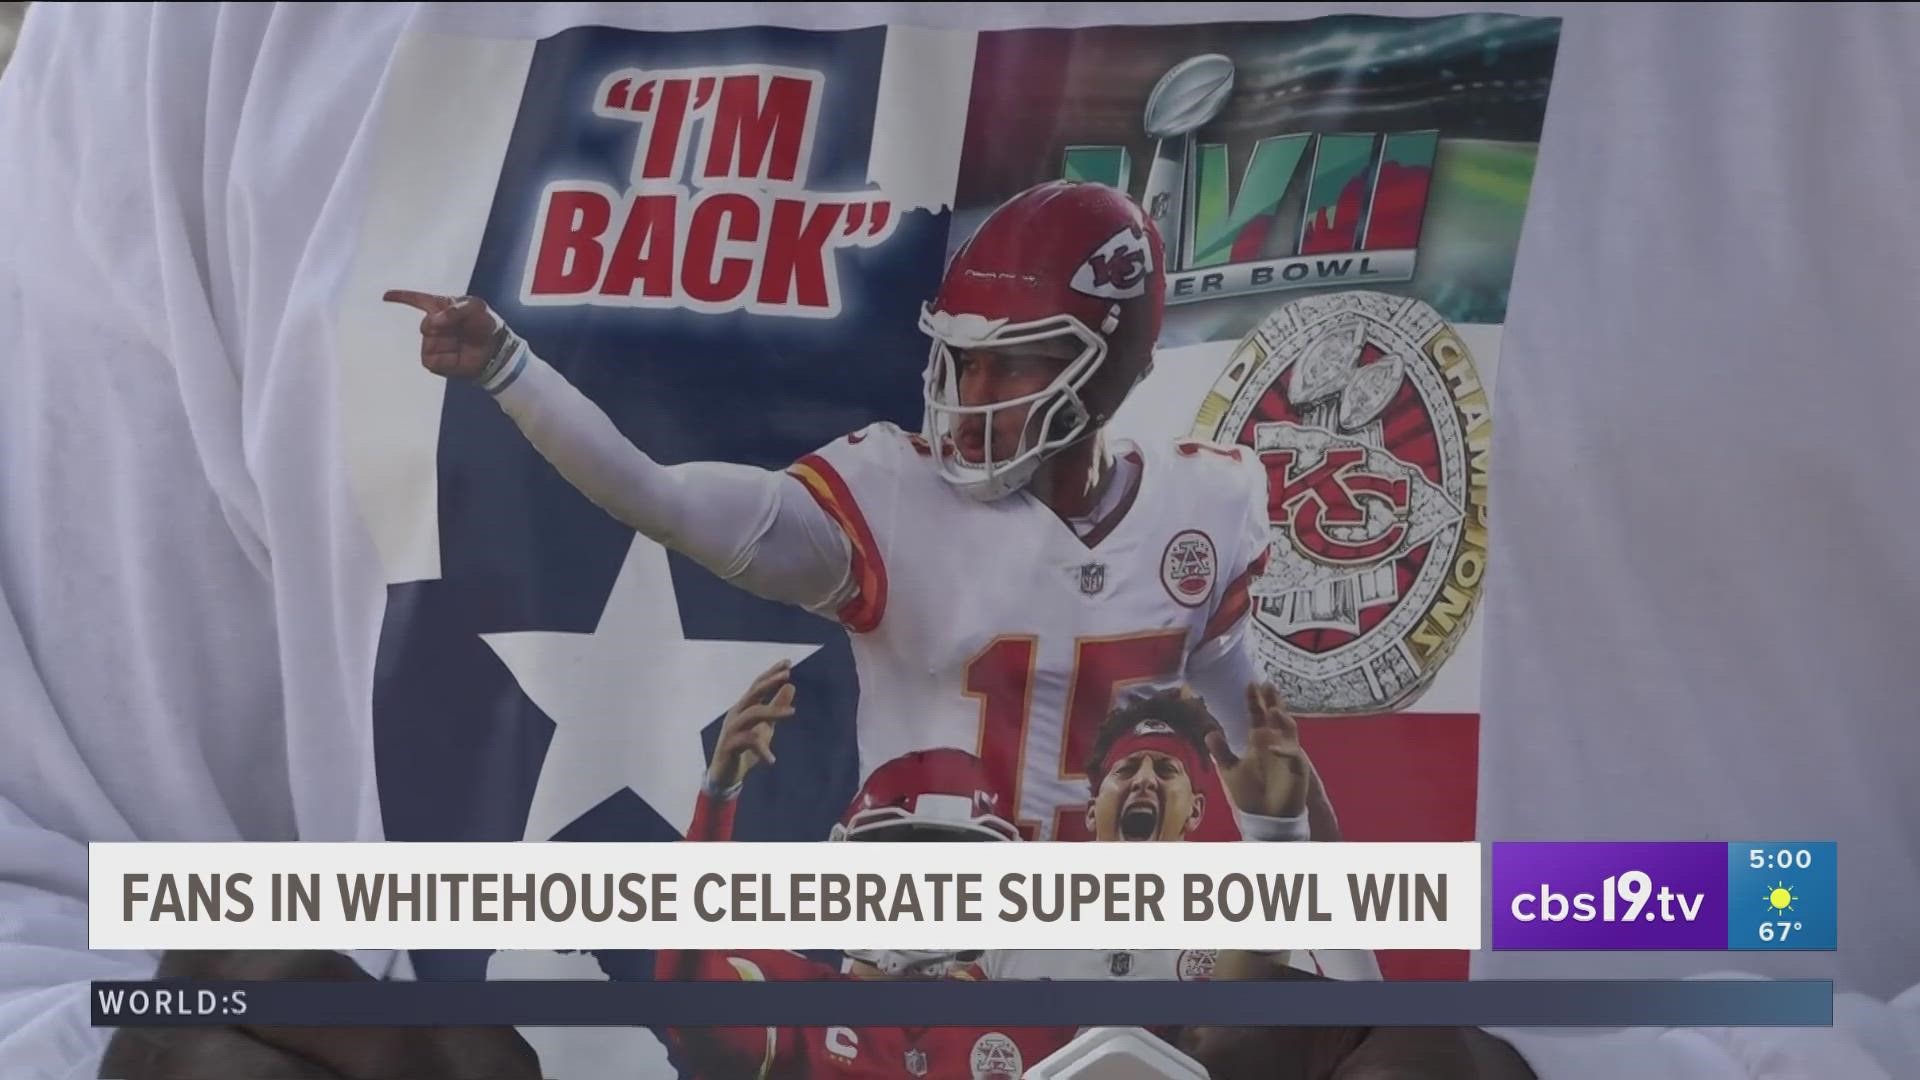 Football fans in Whitehouse celebrate Patrick Mahomes second Super Bowl win